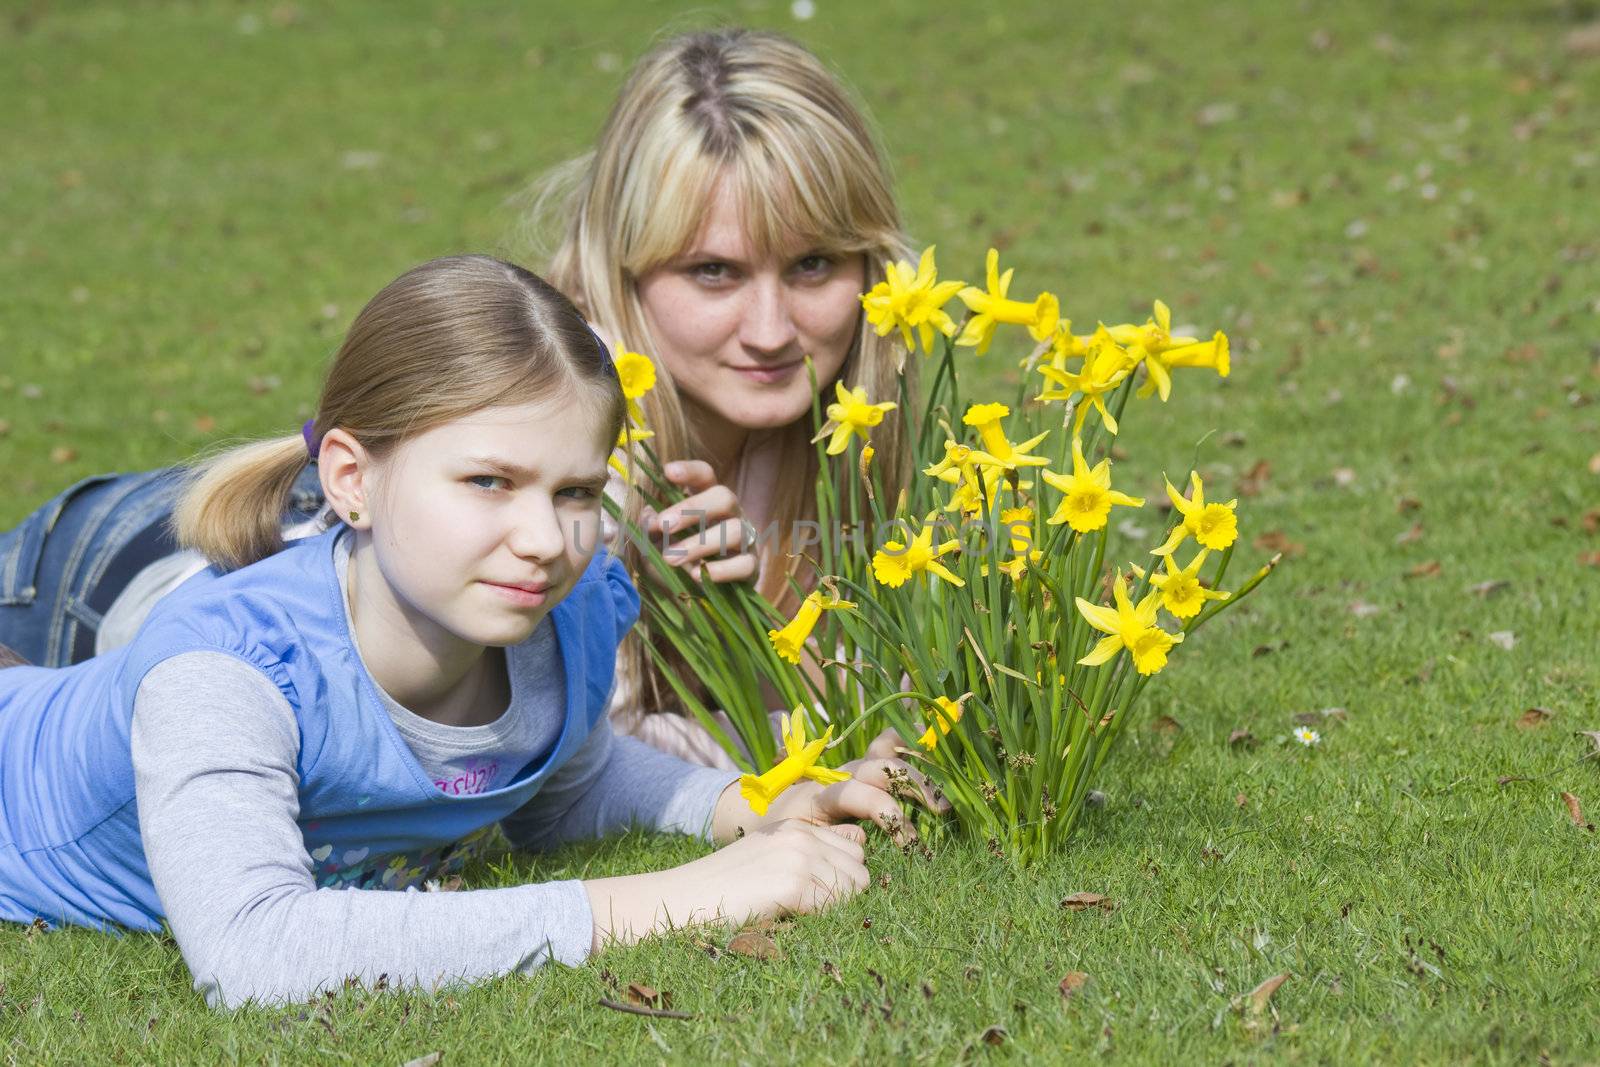  young woman and little girl in the park on a warm spring day